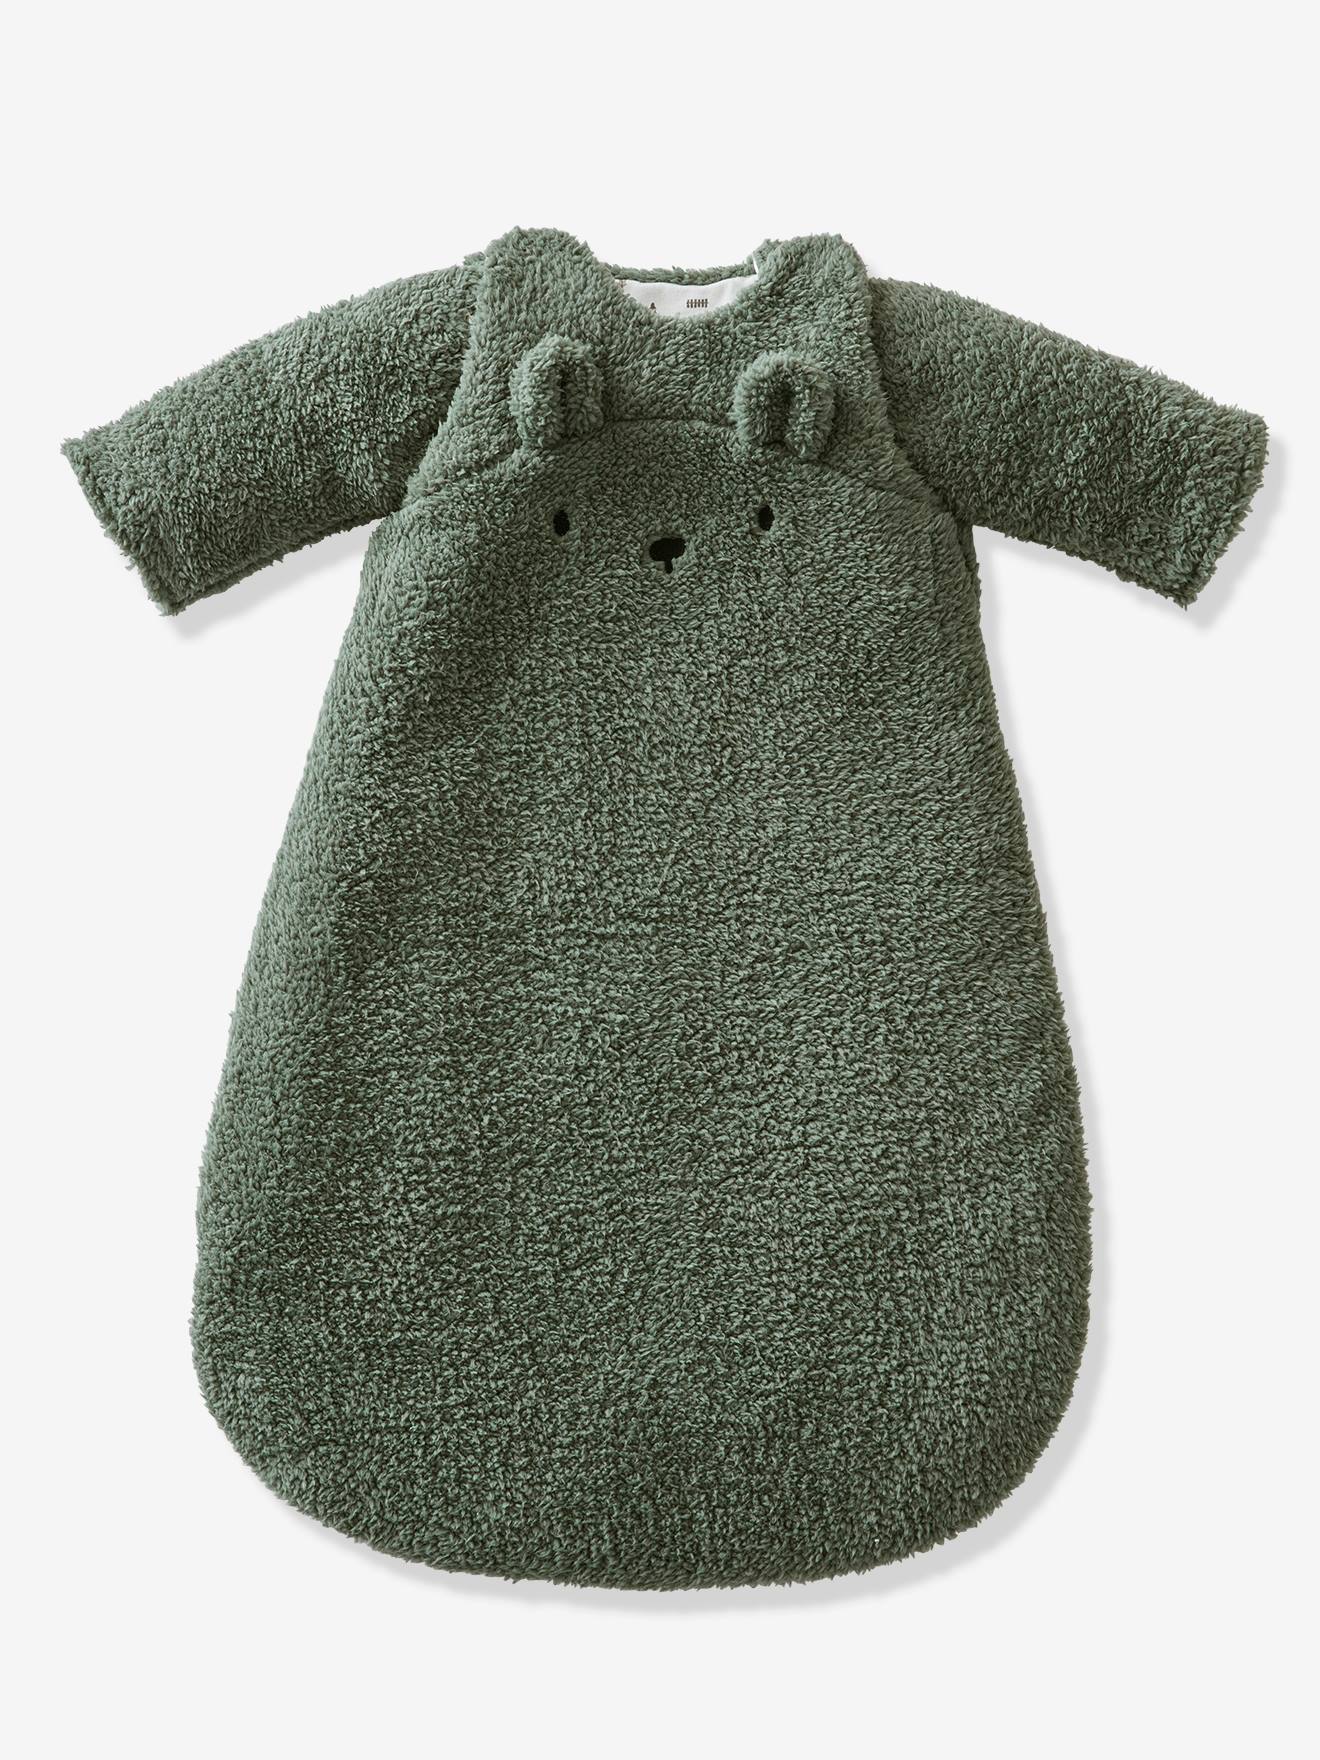 Bear Baby Sleep Bag with Removable Sleeves, GREEN FOREST sage green